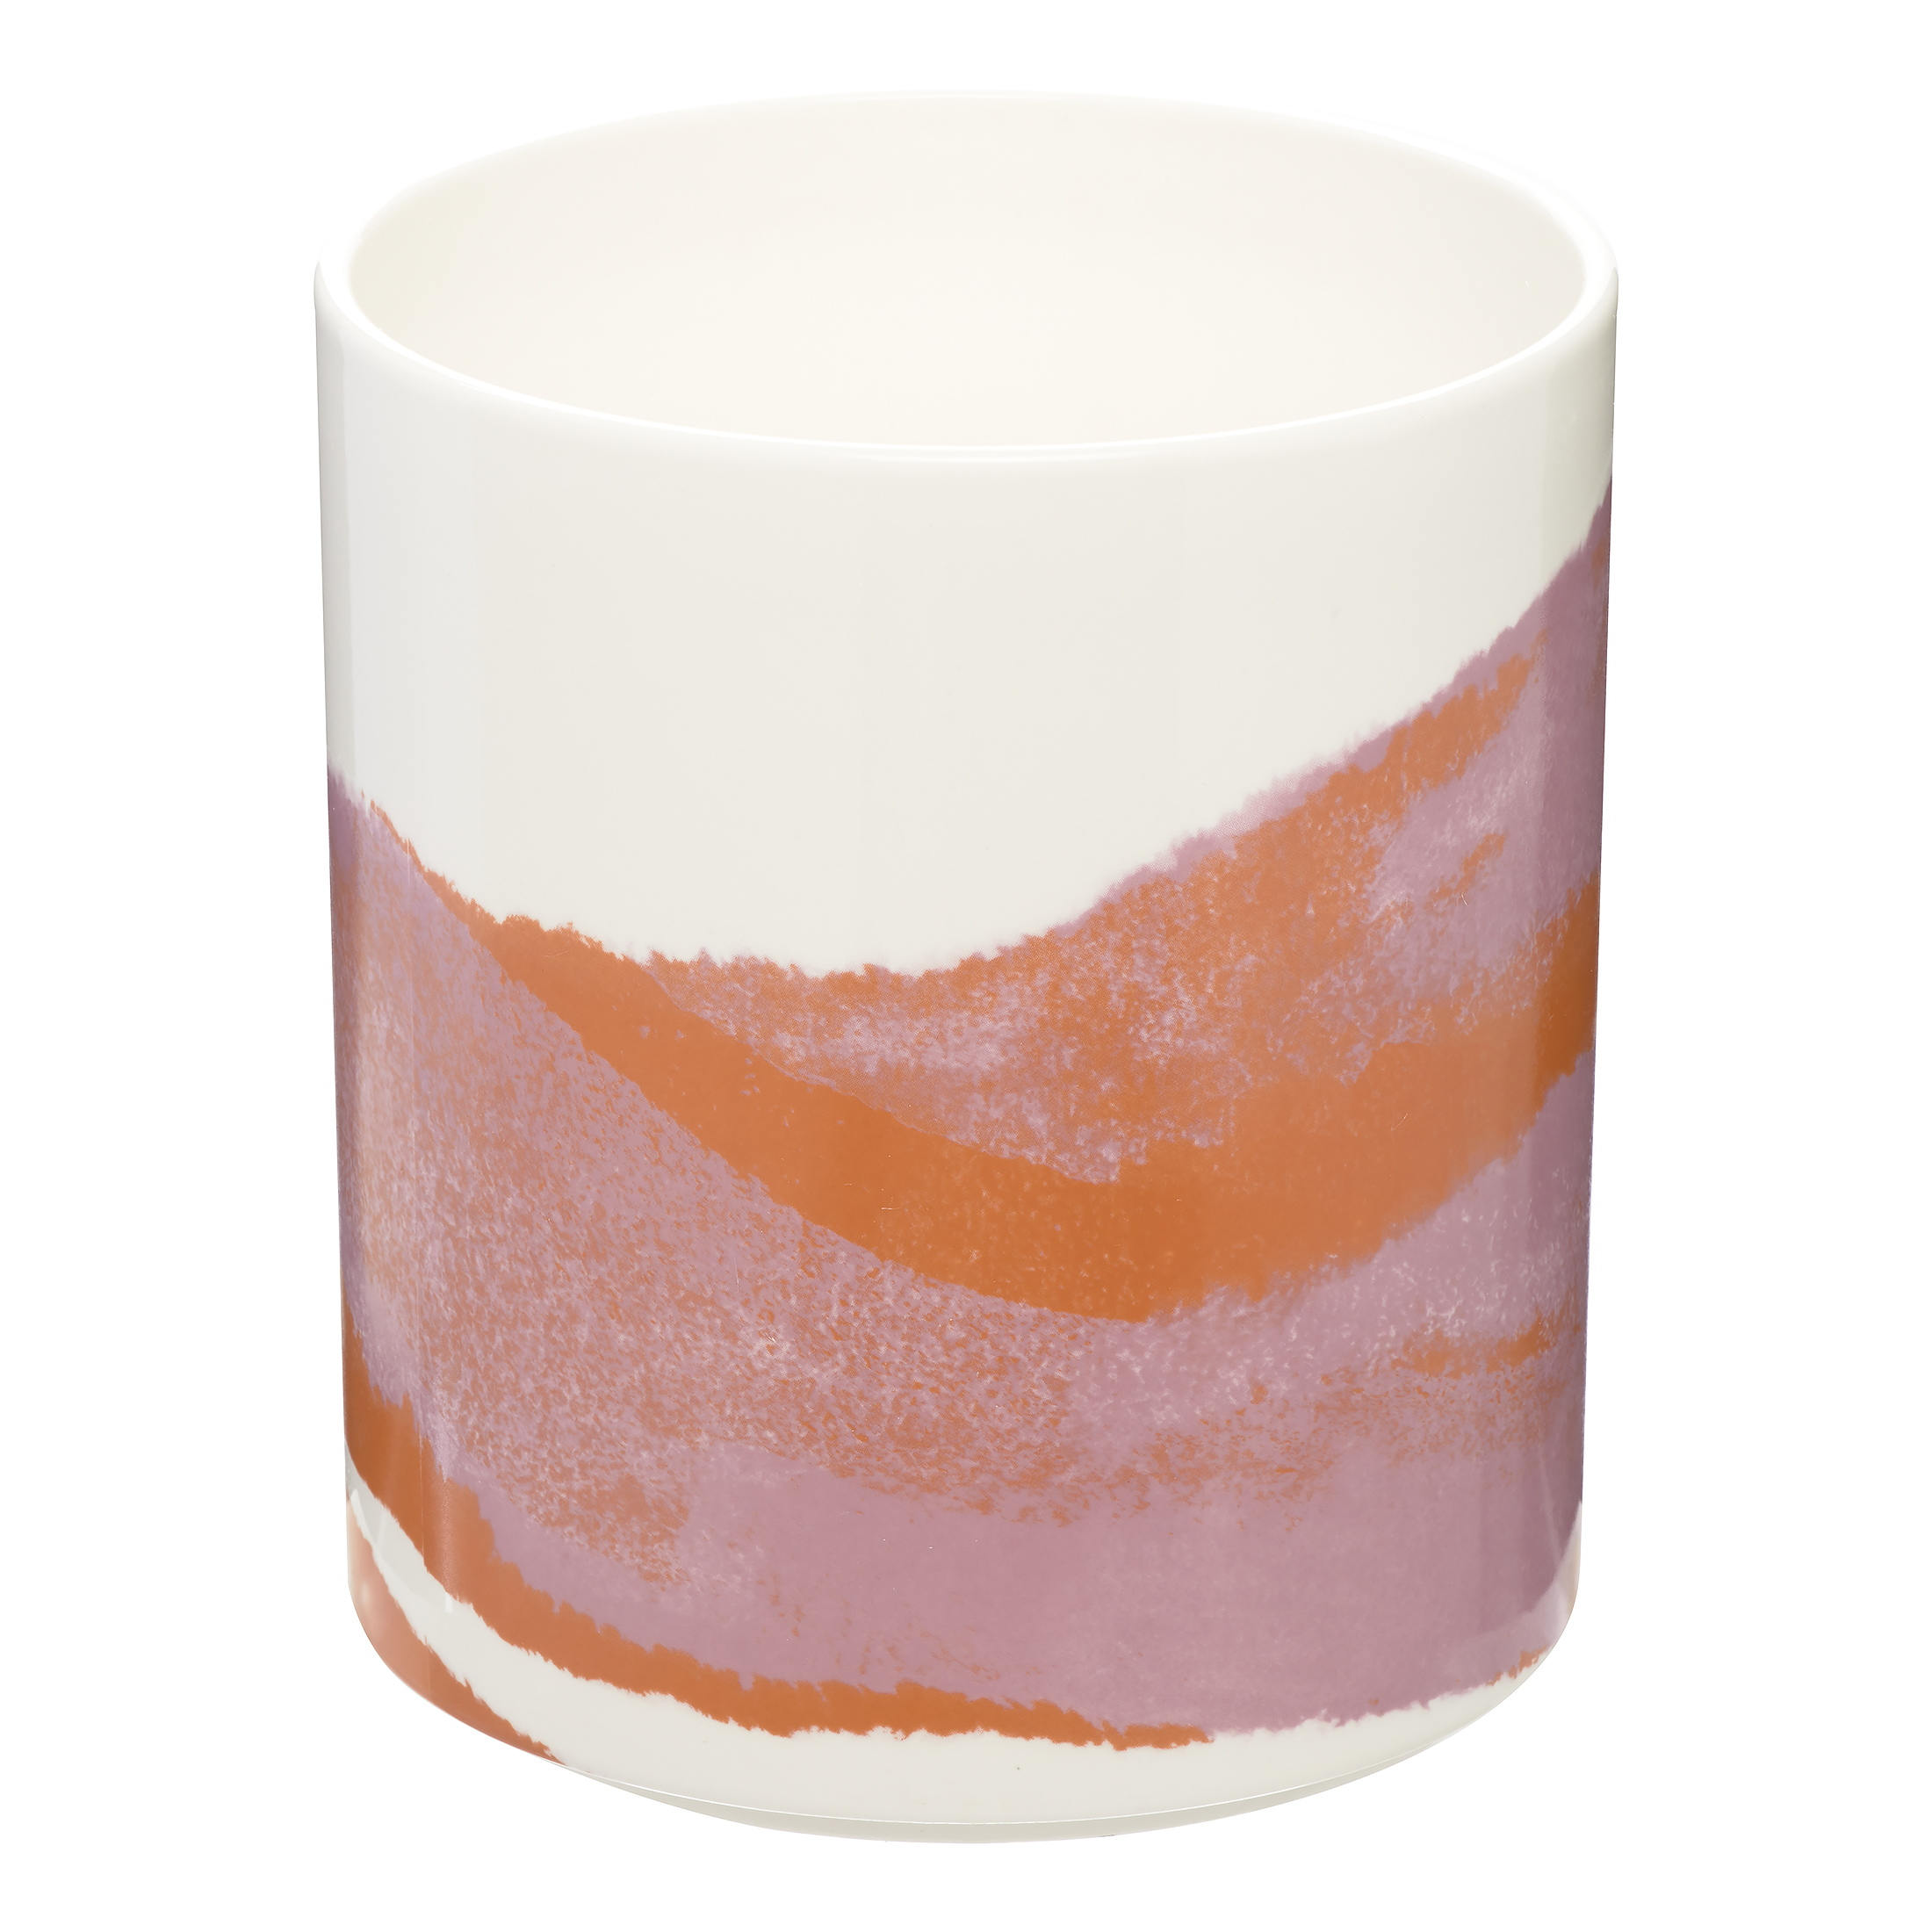 Abstract Marble Utensil Holder by Drew Barrymore Flower Home - image 1 of 8